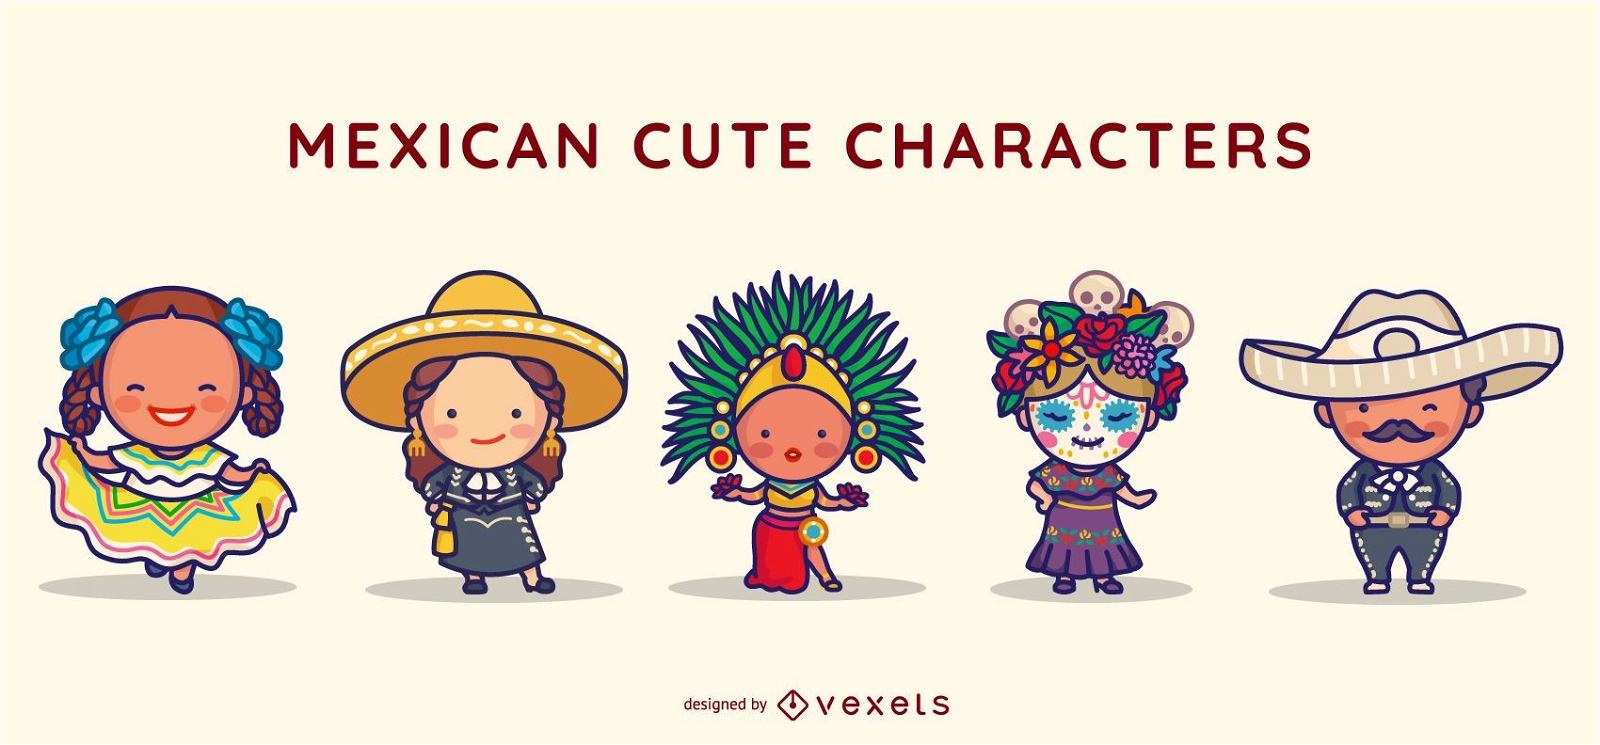 Mexican cute characters set.